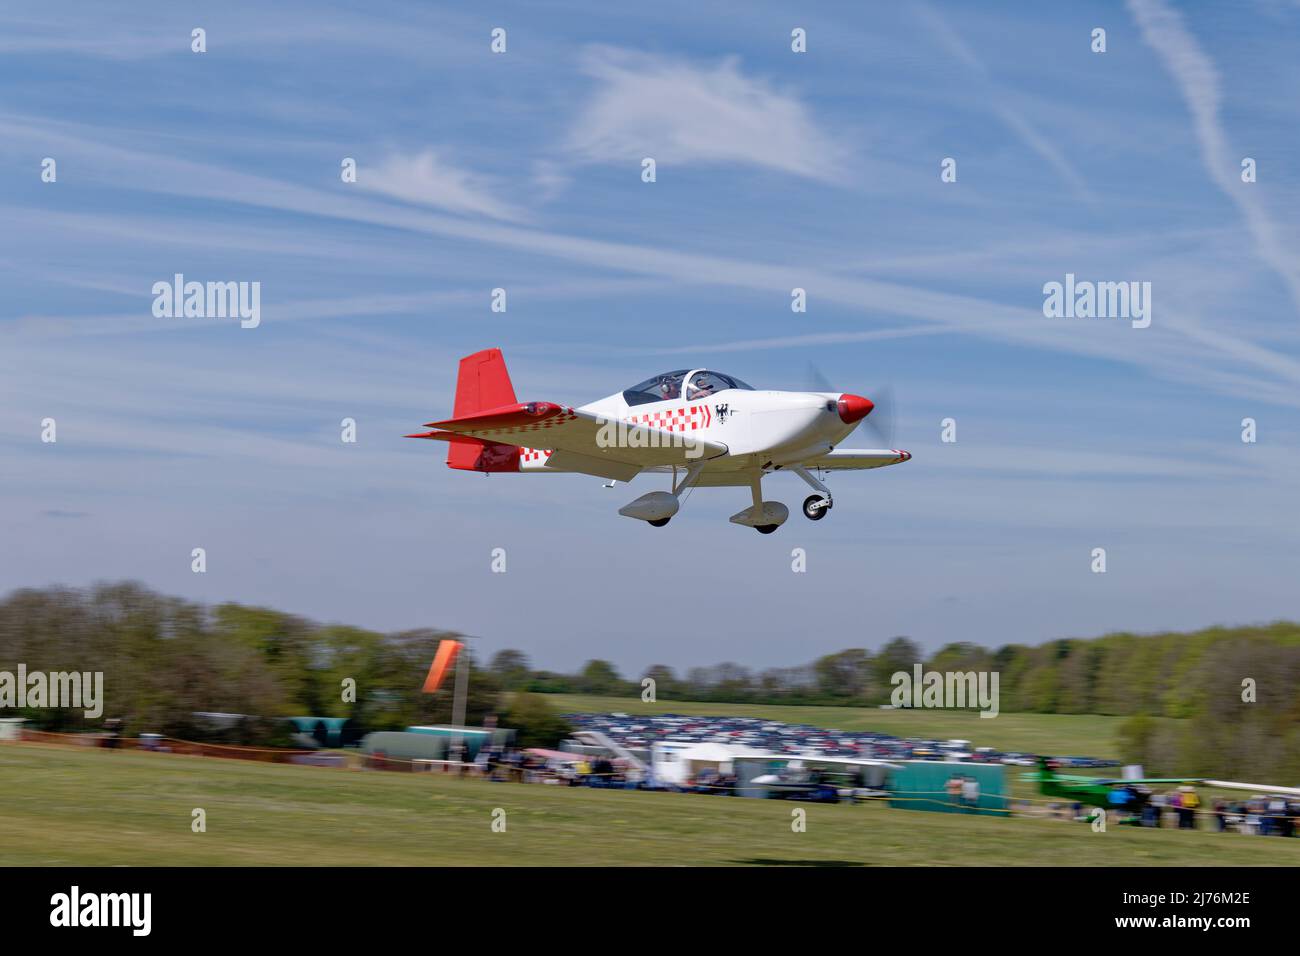 Smart Red & White Vans RV-7 airplane G-DPRV arrives at Popham airfield in Hampshire England to attend the annual microlight aircraft fly-in meeting Stock Photo